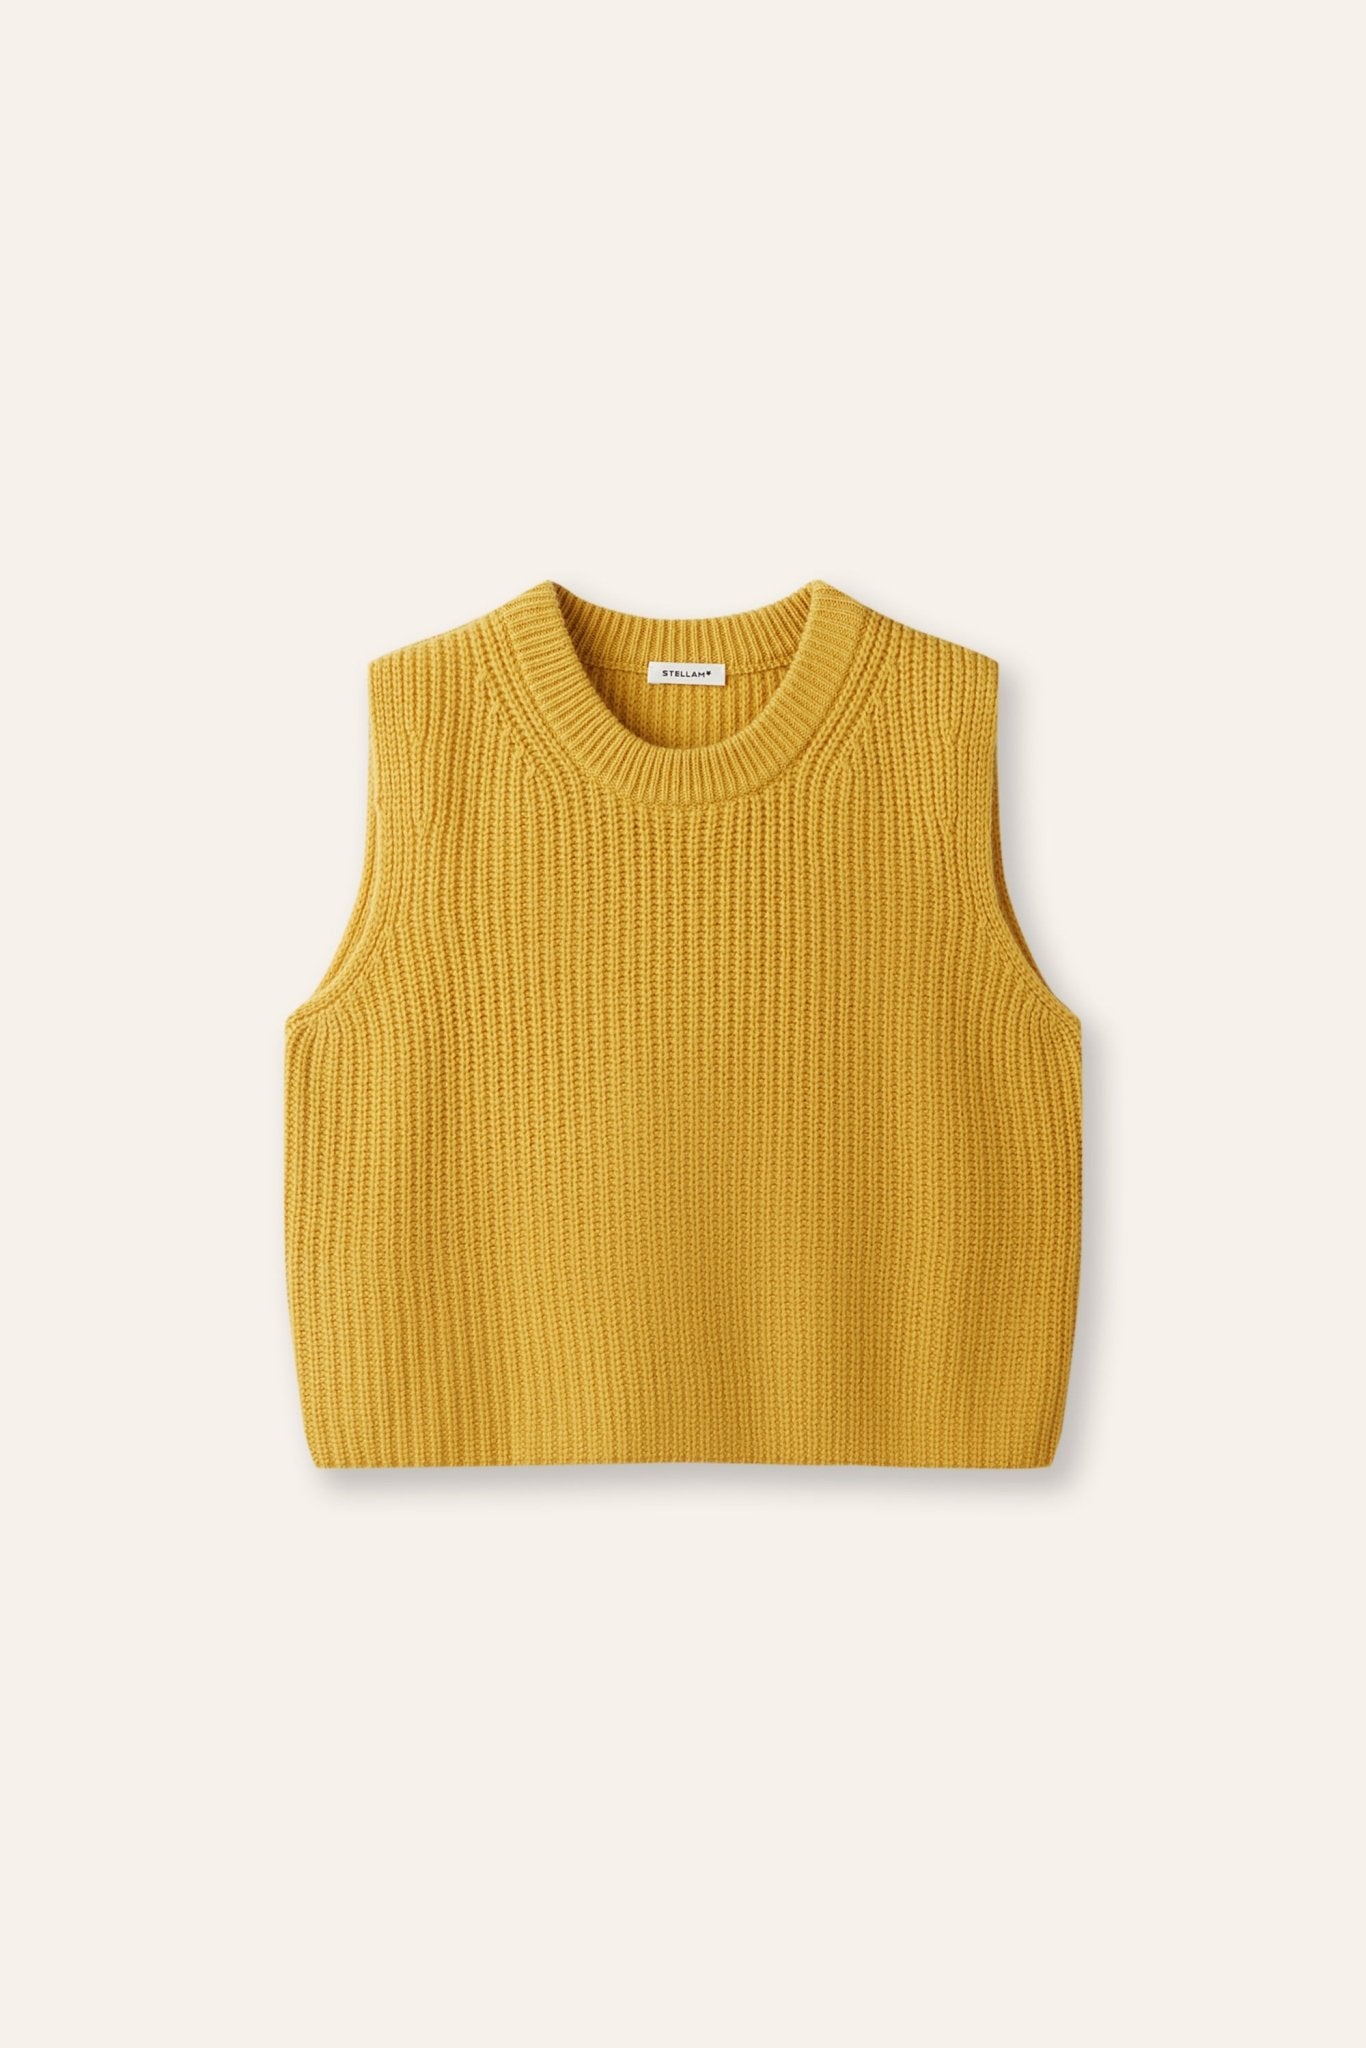 COCO cashmere cropped tank top (Honey) - STELLAM